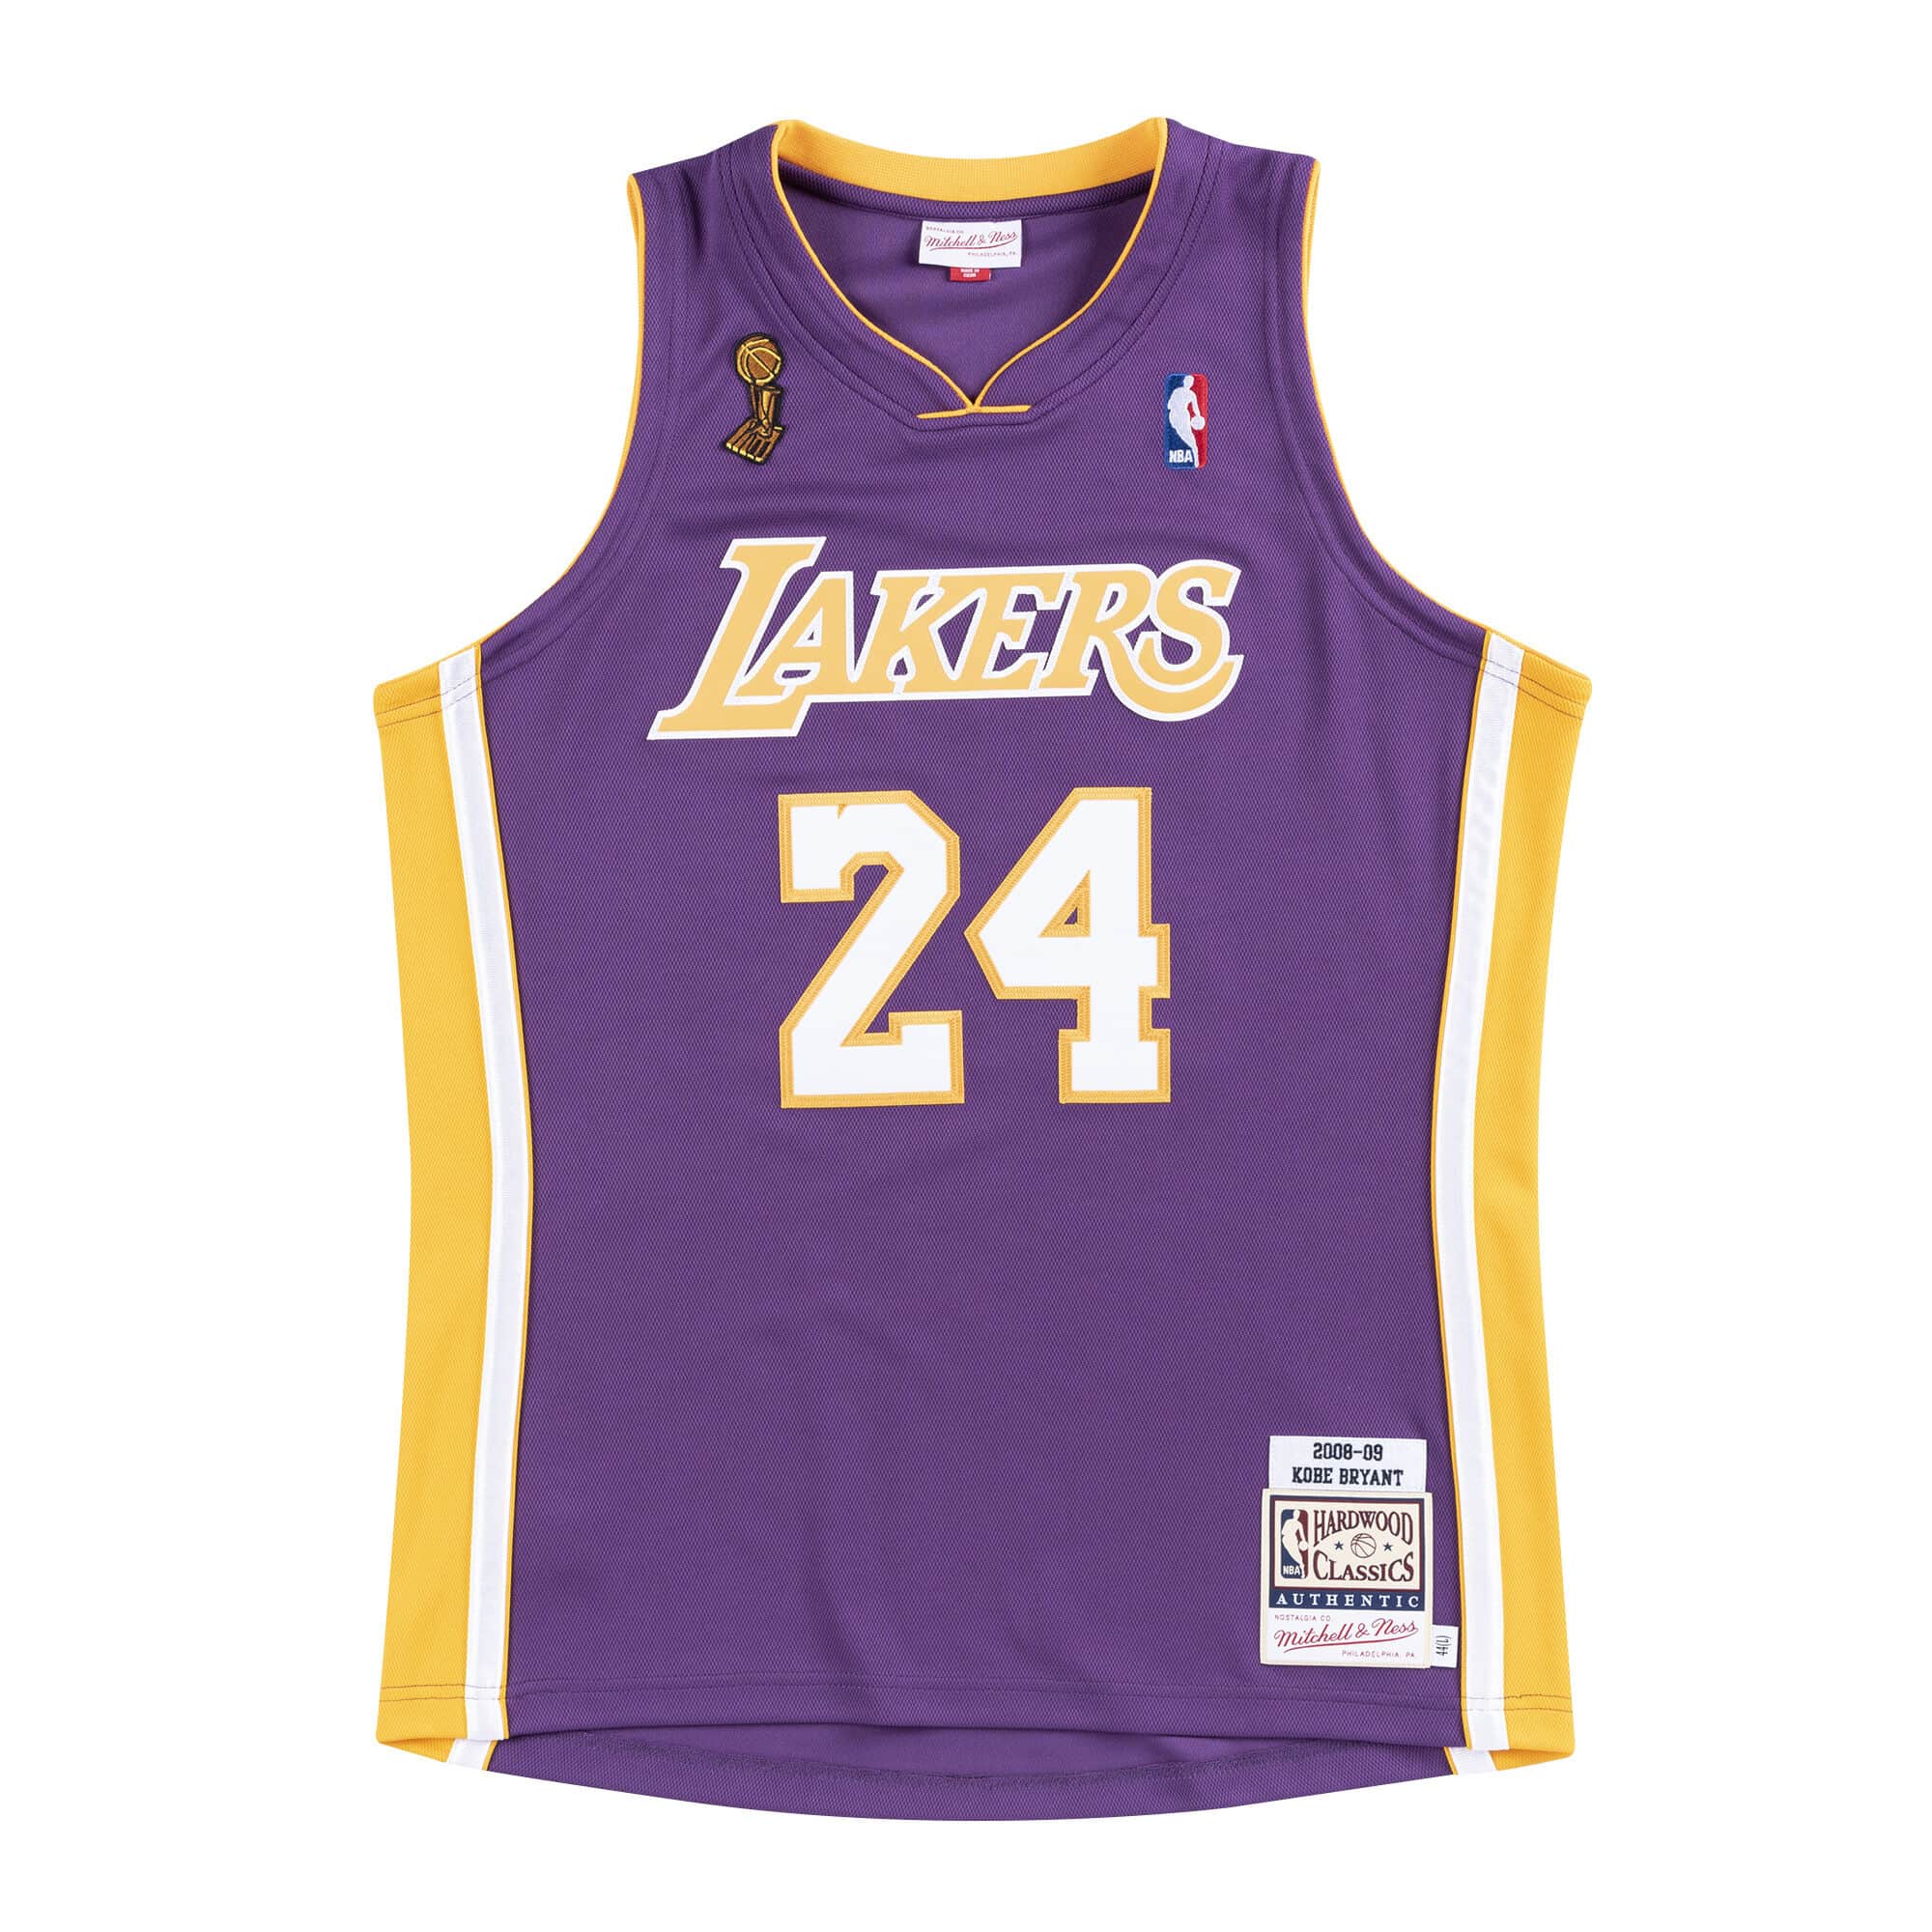 Buy NBA LOS ANGELES LAKERS 2008-09 AUTHENTIC JERSEY KOBE BRYANT for EUR  269.90 on !